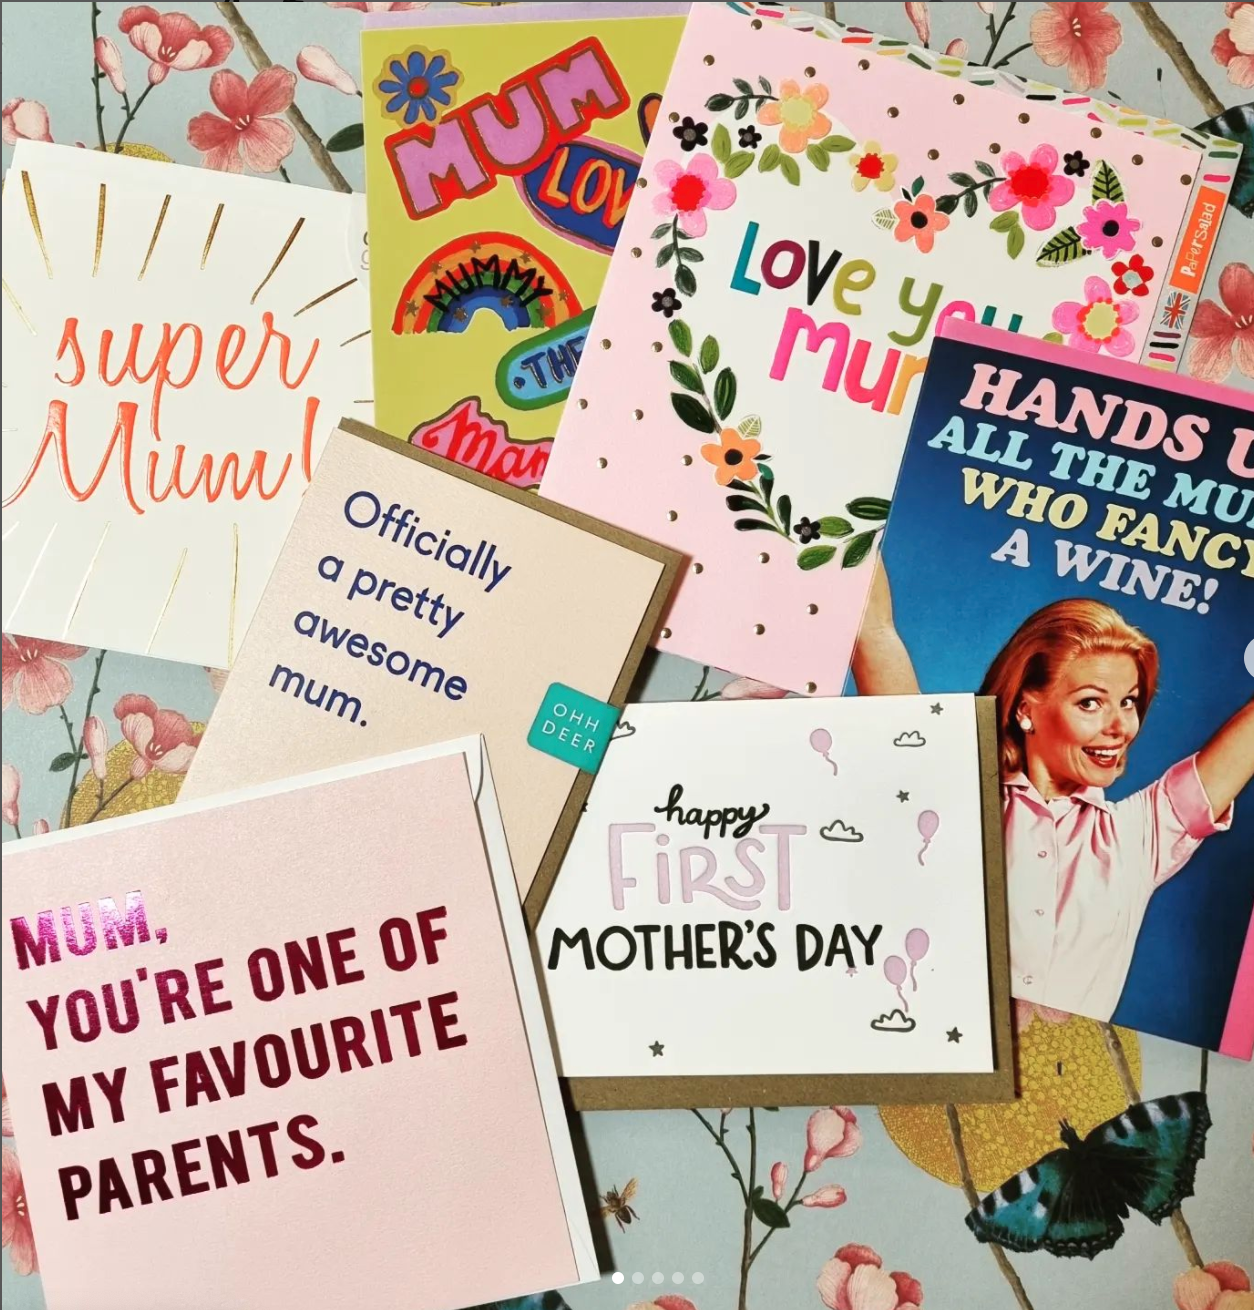 Above: A selection of Mother’s Day cards posted on Set’s social media channels